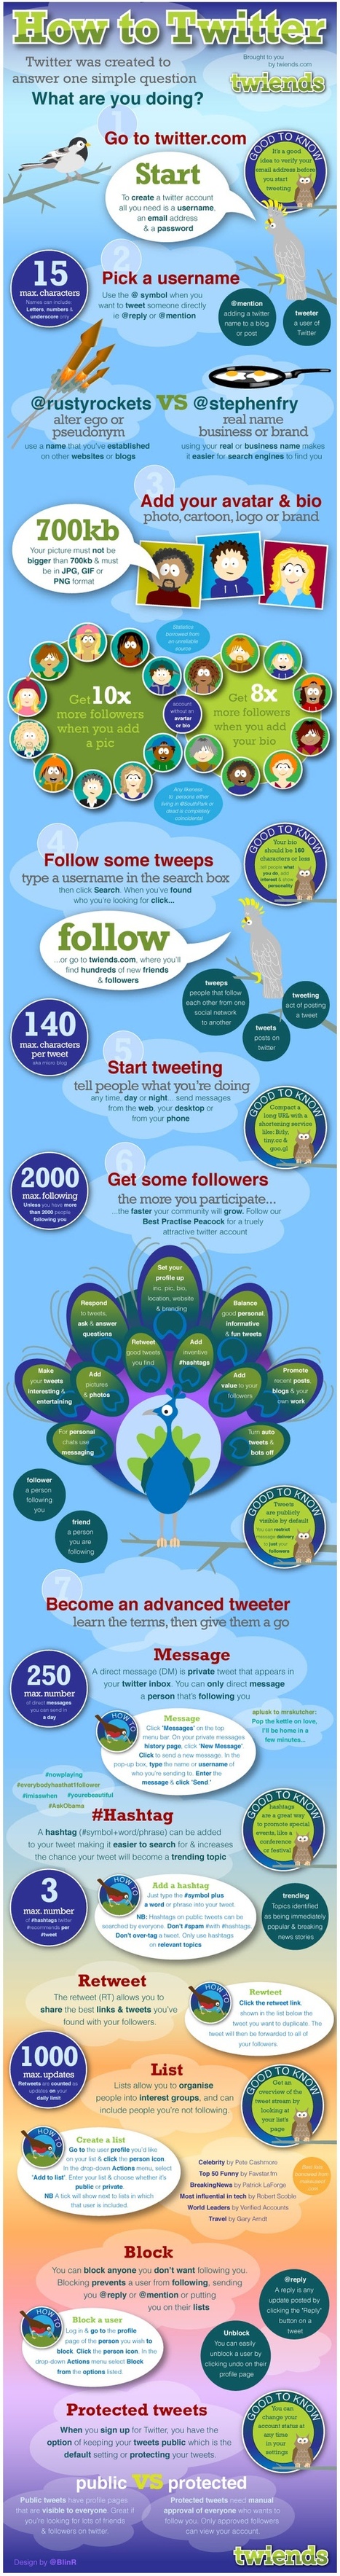 How to Twitter in 60 Seconds [Infographic] | Web 2.0 for juandoming | Scoop.it